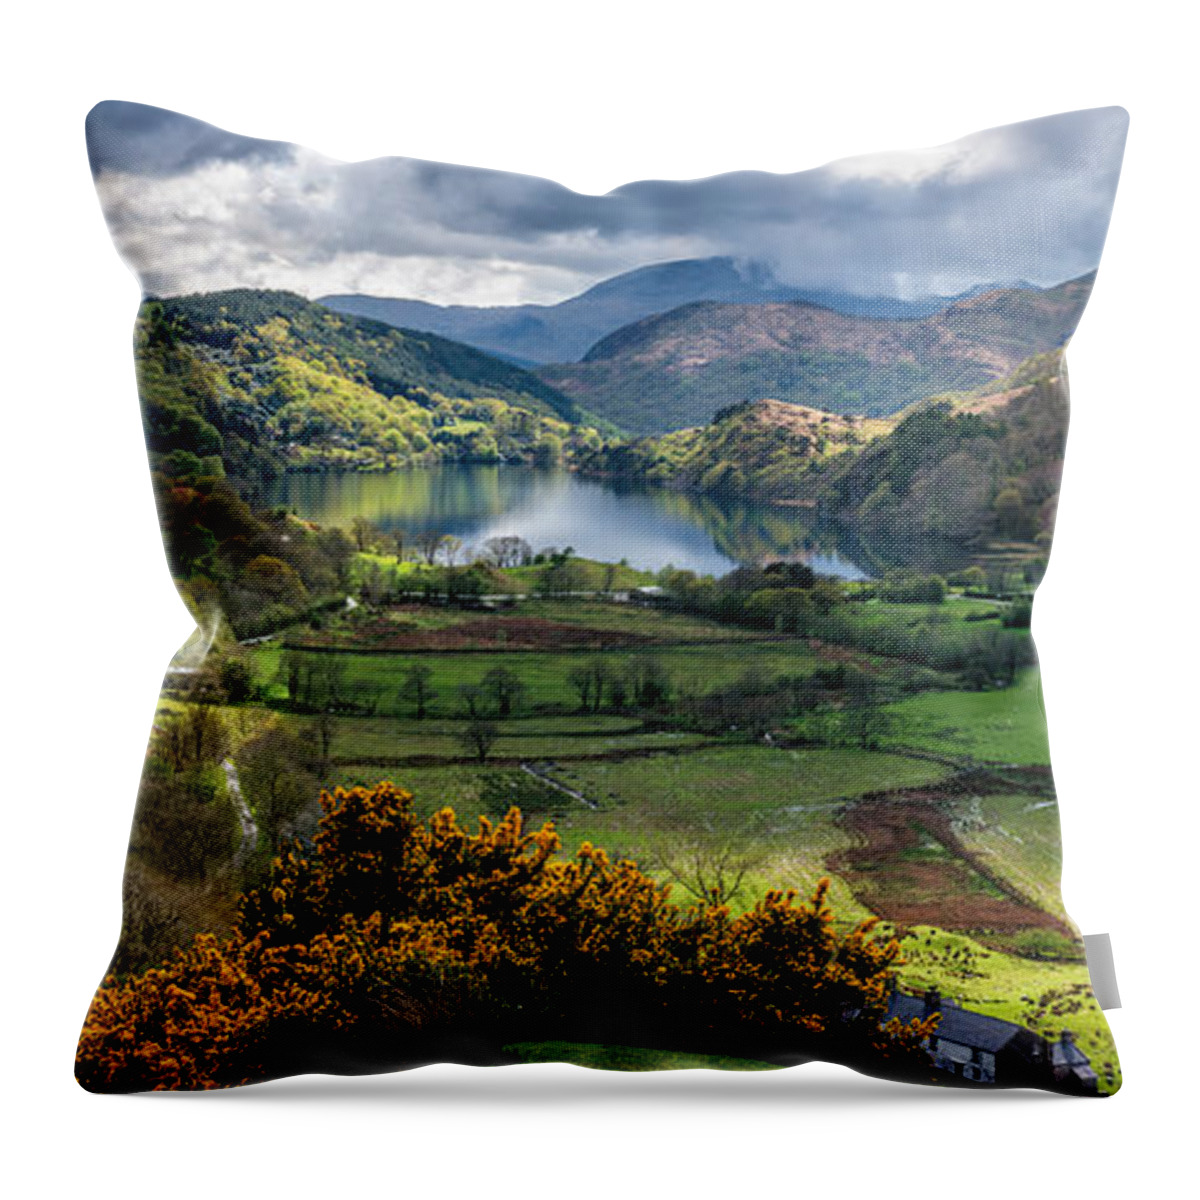 Gwynant Lake Throw Pillow featuring the photograph Nant Gwynant Valley by Adrian Evans